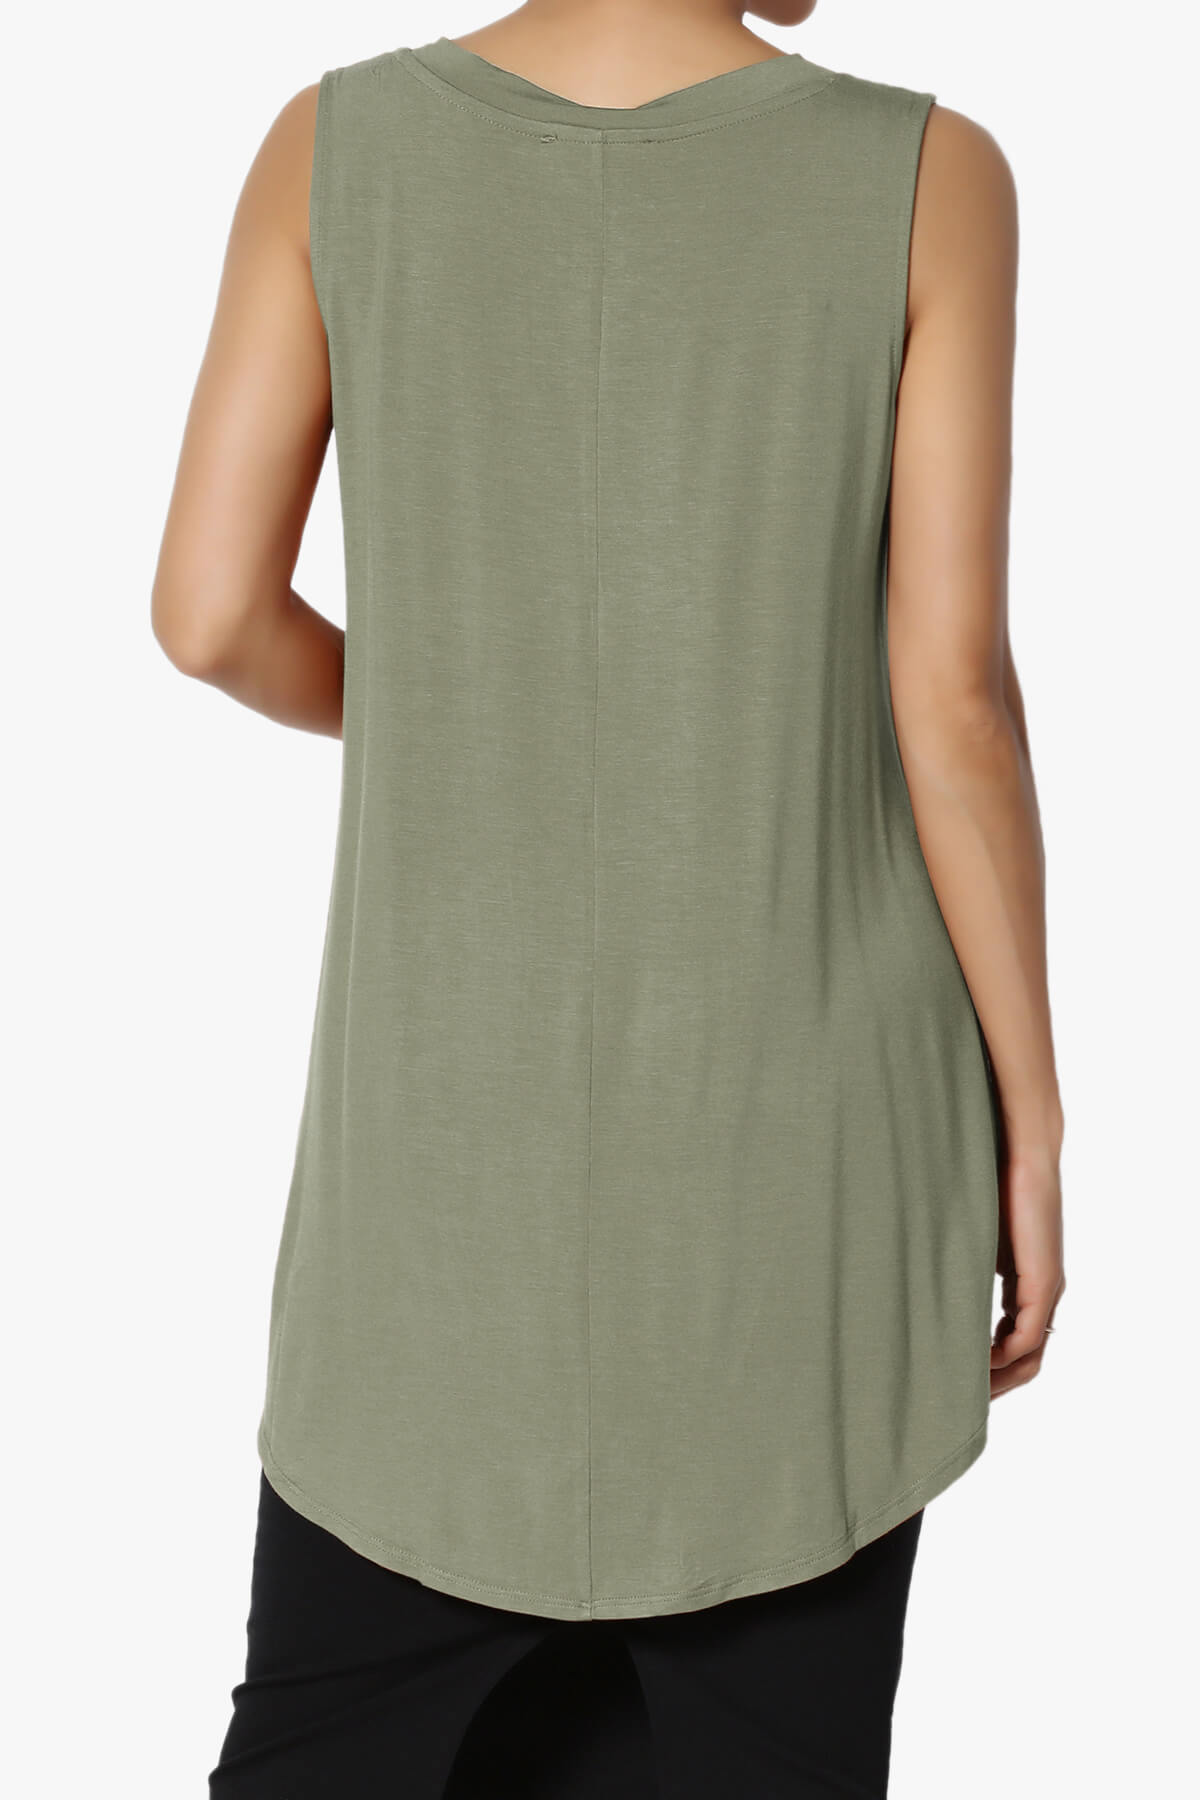 Myles Sleeveless V-Neck Luxe Jersey Top DUSTY OLIVE_2